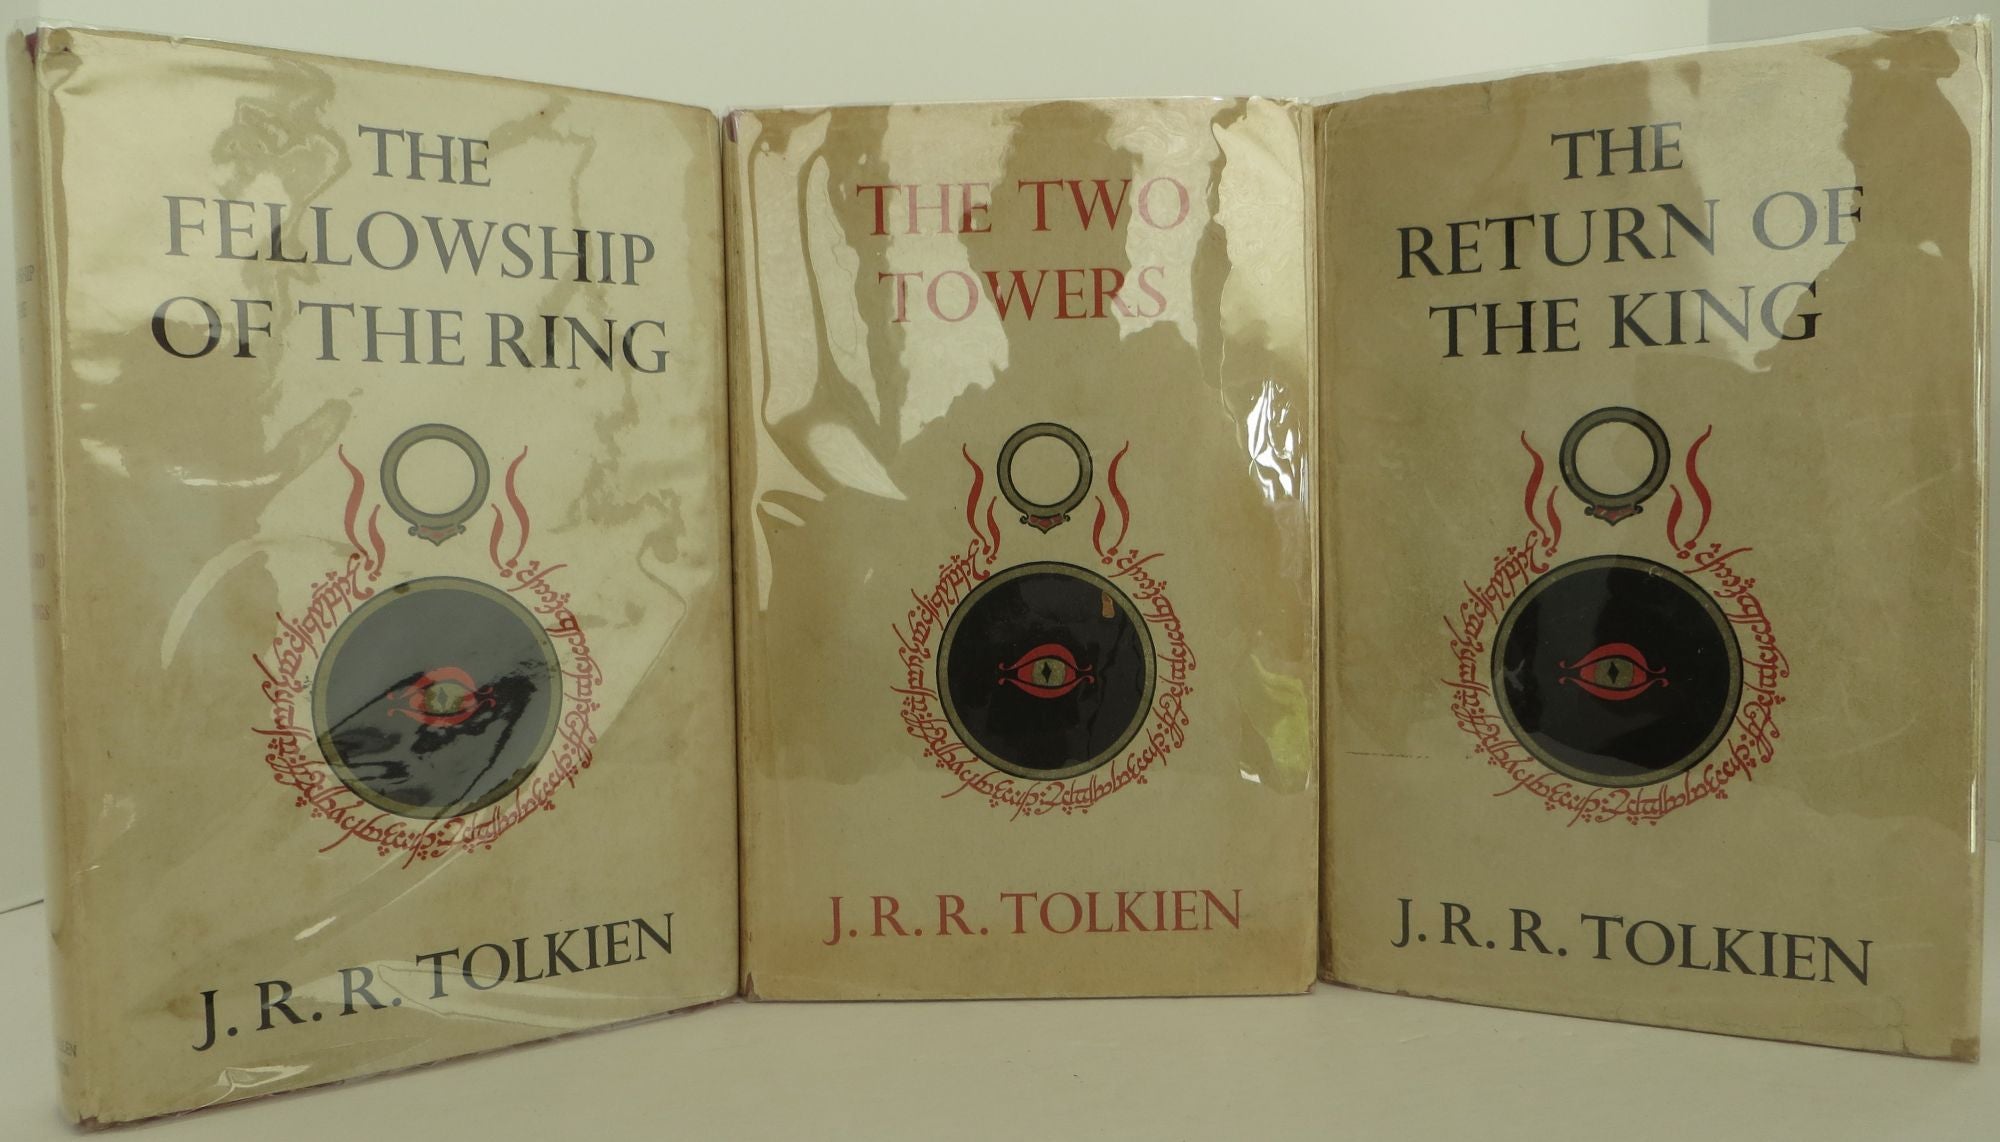 The Return Of The King - (lord Of The Rings) By J R R Tolkien